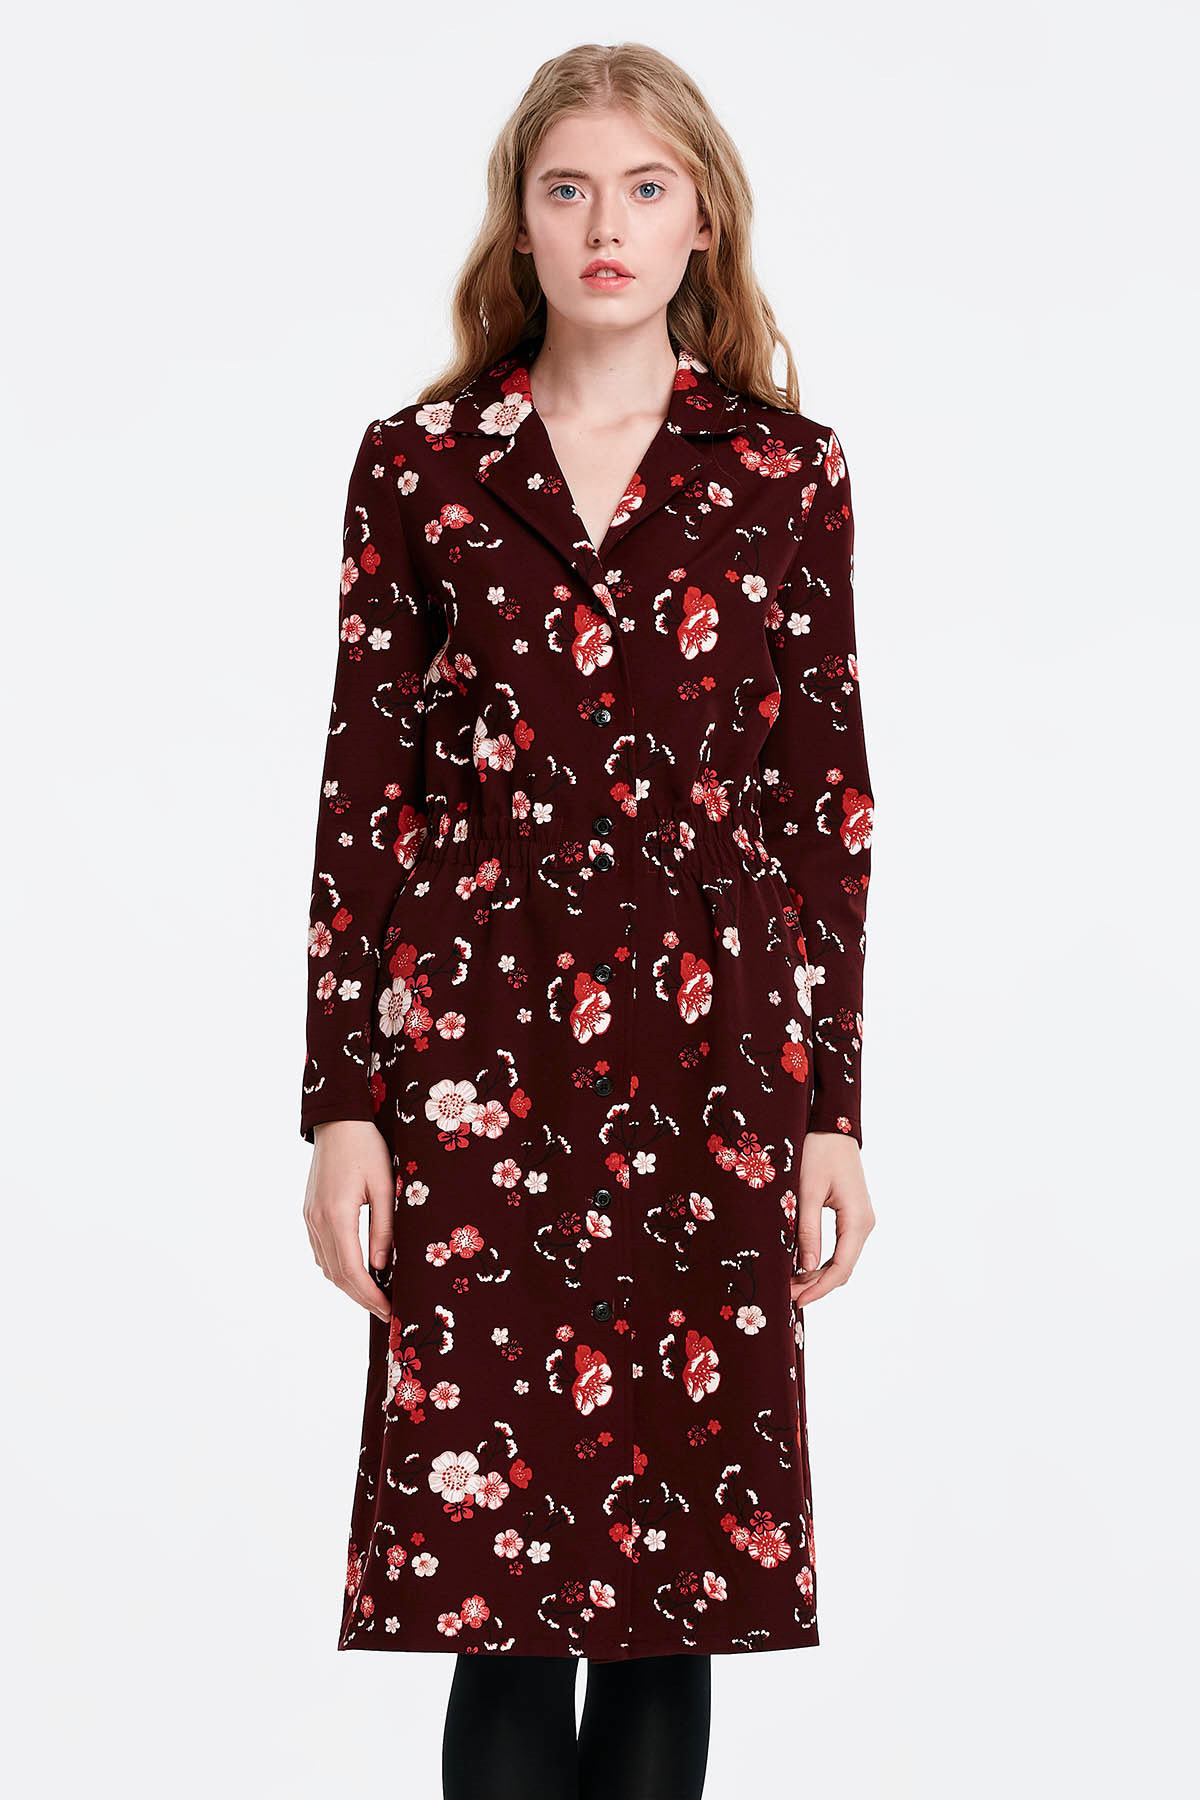 Burgundy dress with a floral print and buttons , photo 1